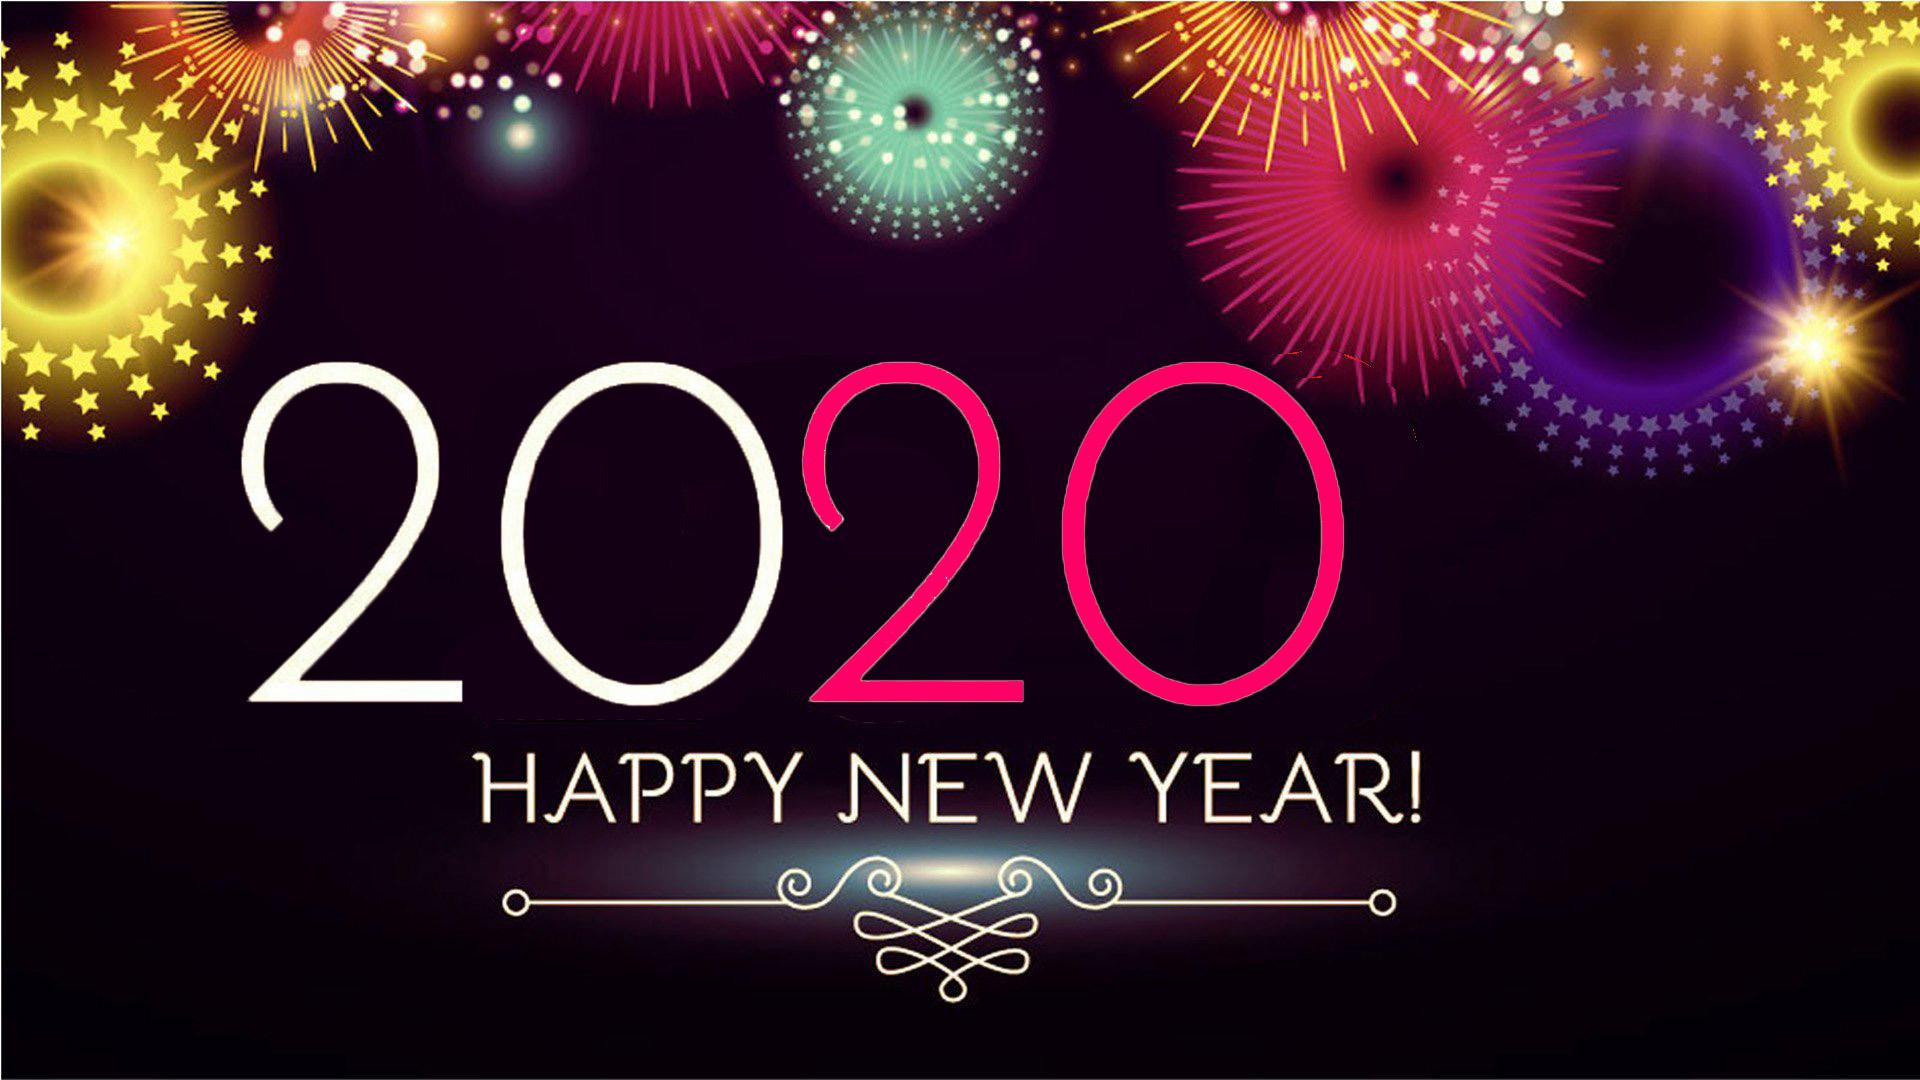 Happy New Year 2020 GIFs Best Download (Latest Official)